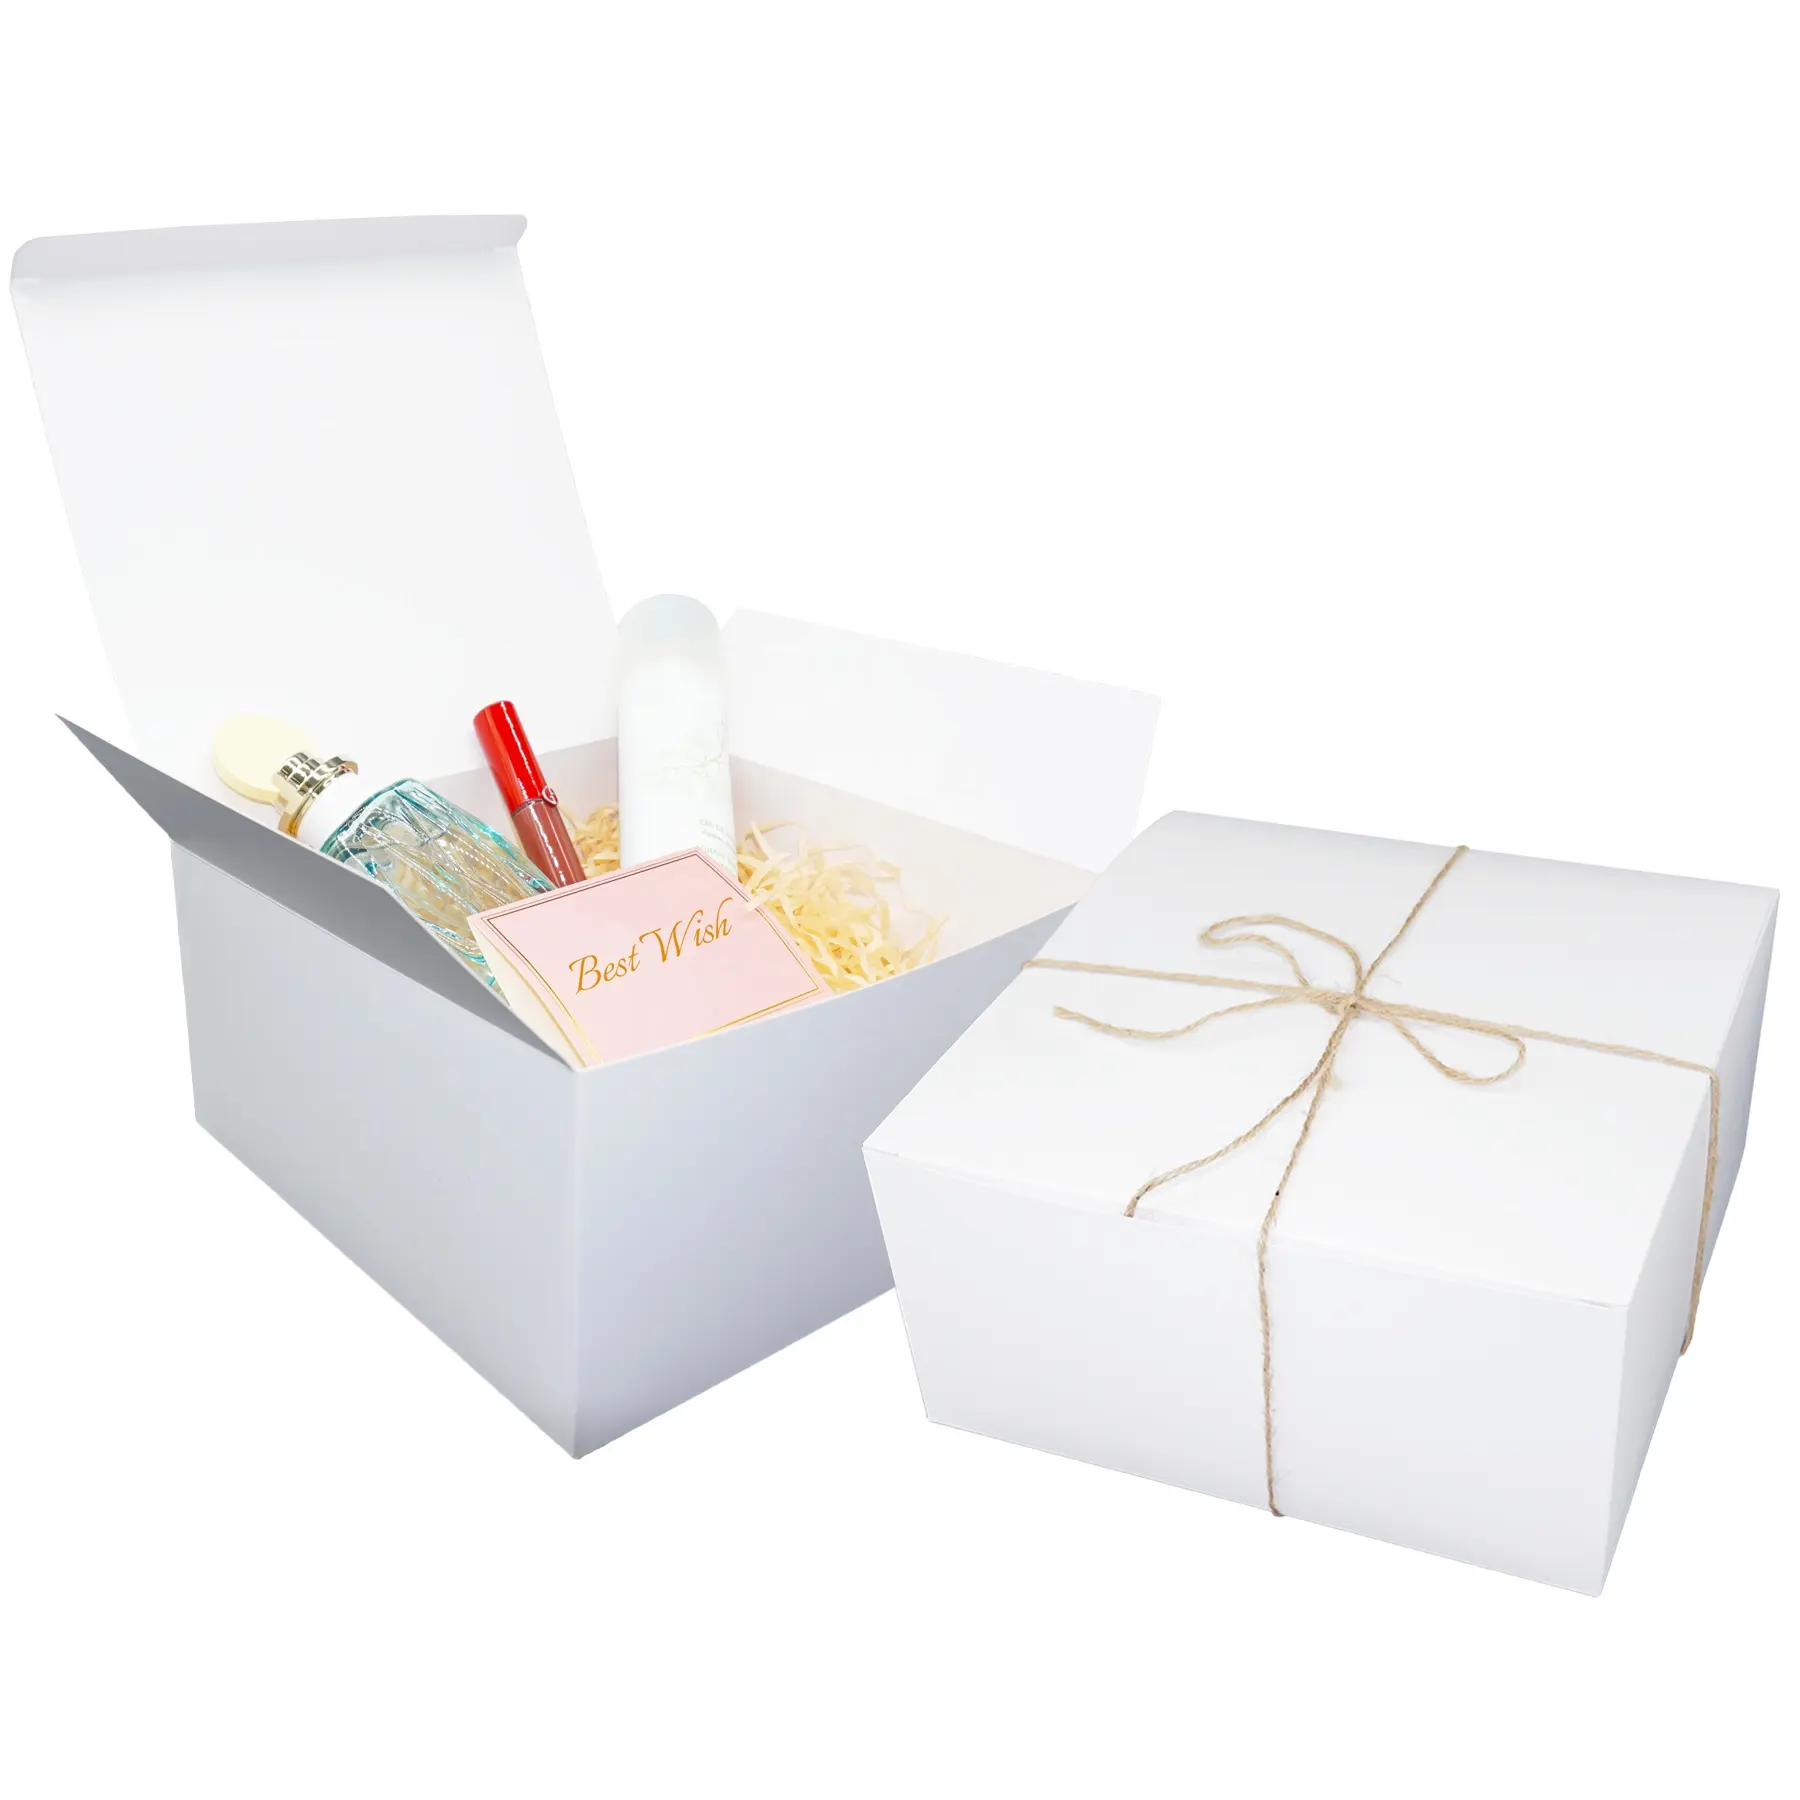 8x8x4 Inch Gift Wrapping Boxes Bridesmaid Proposal Cardboard Box Presents Packaging White Gift Boxes With Lid